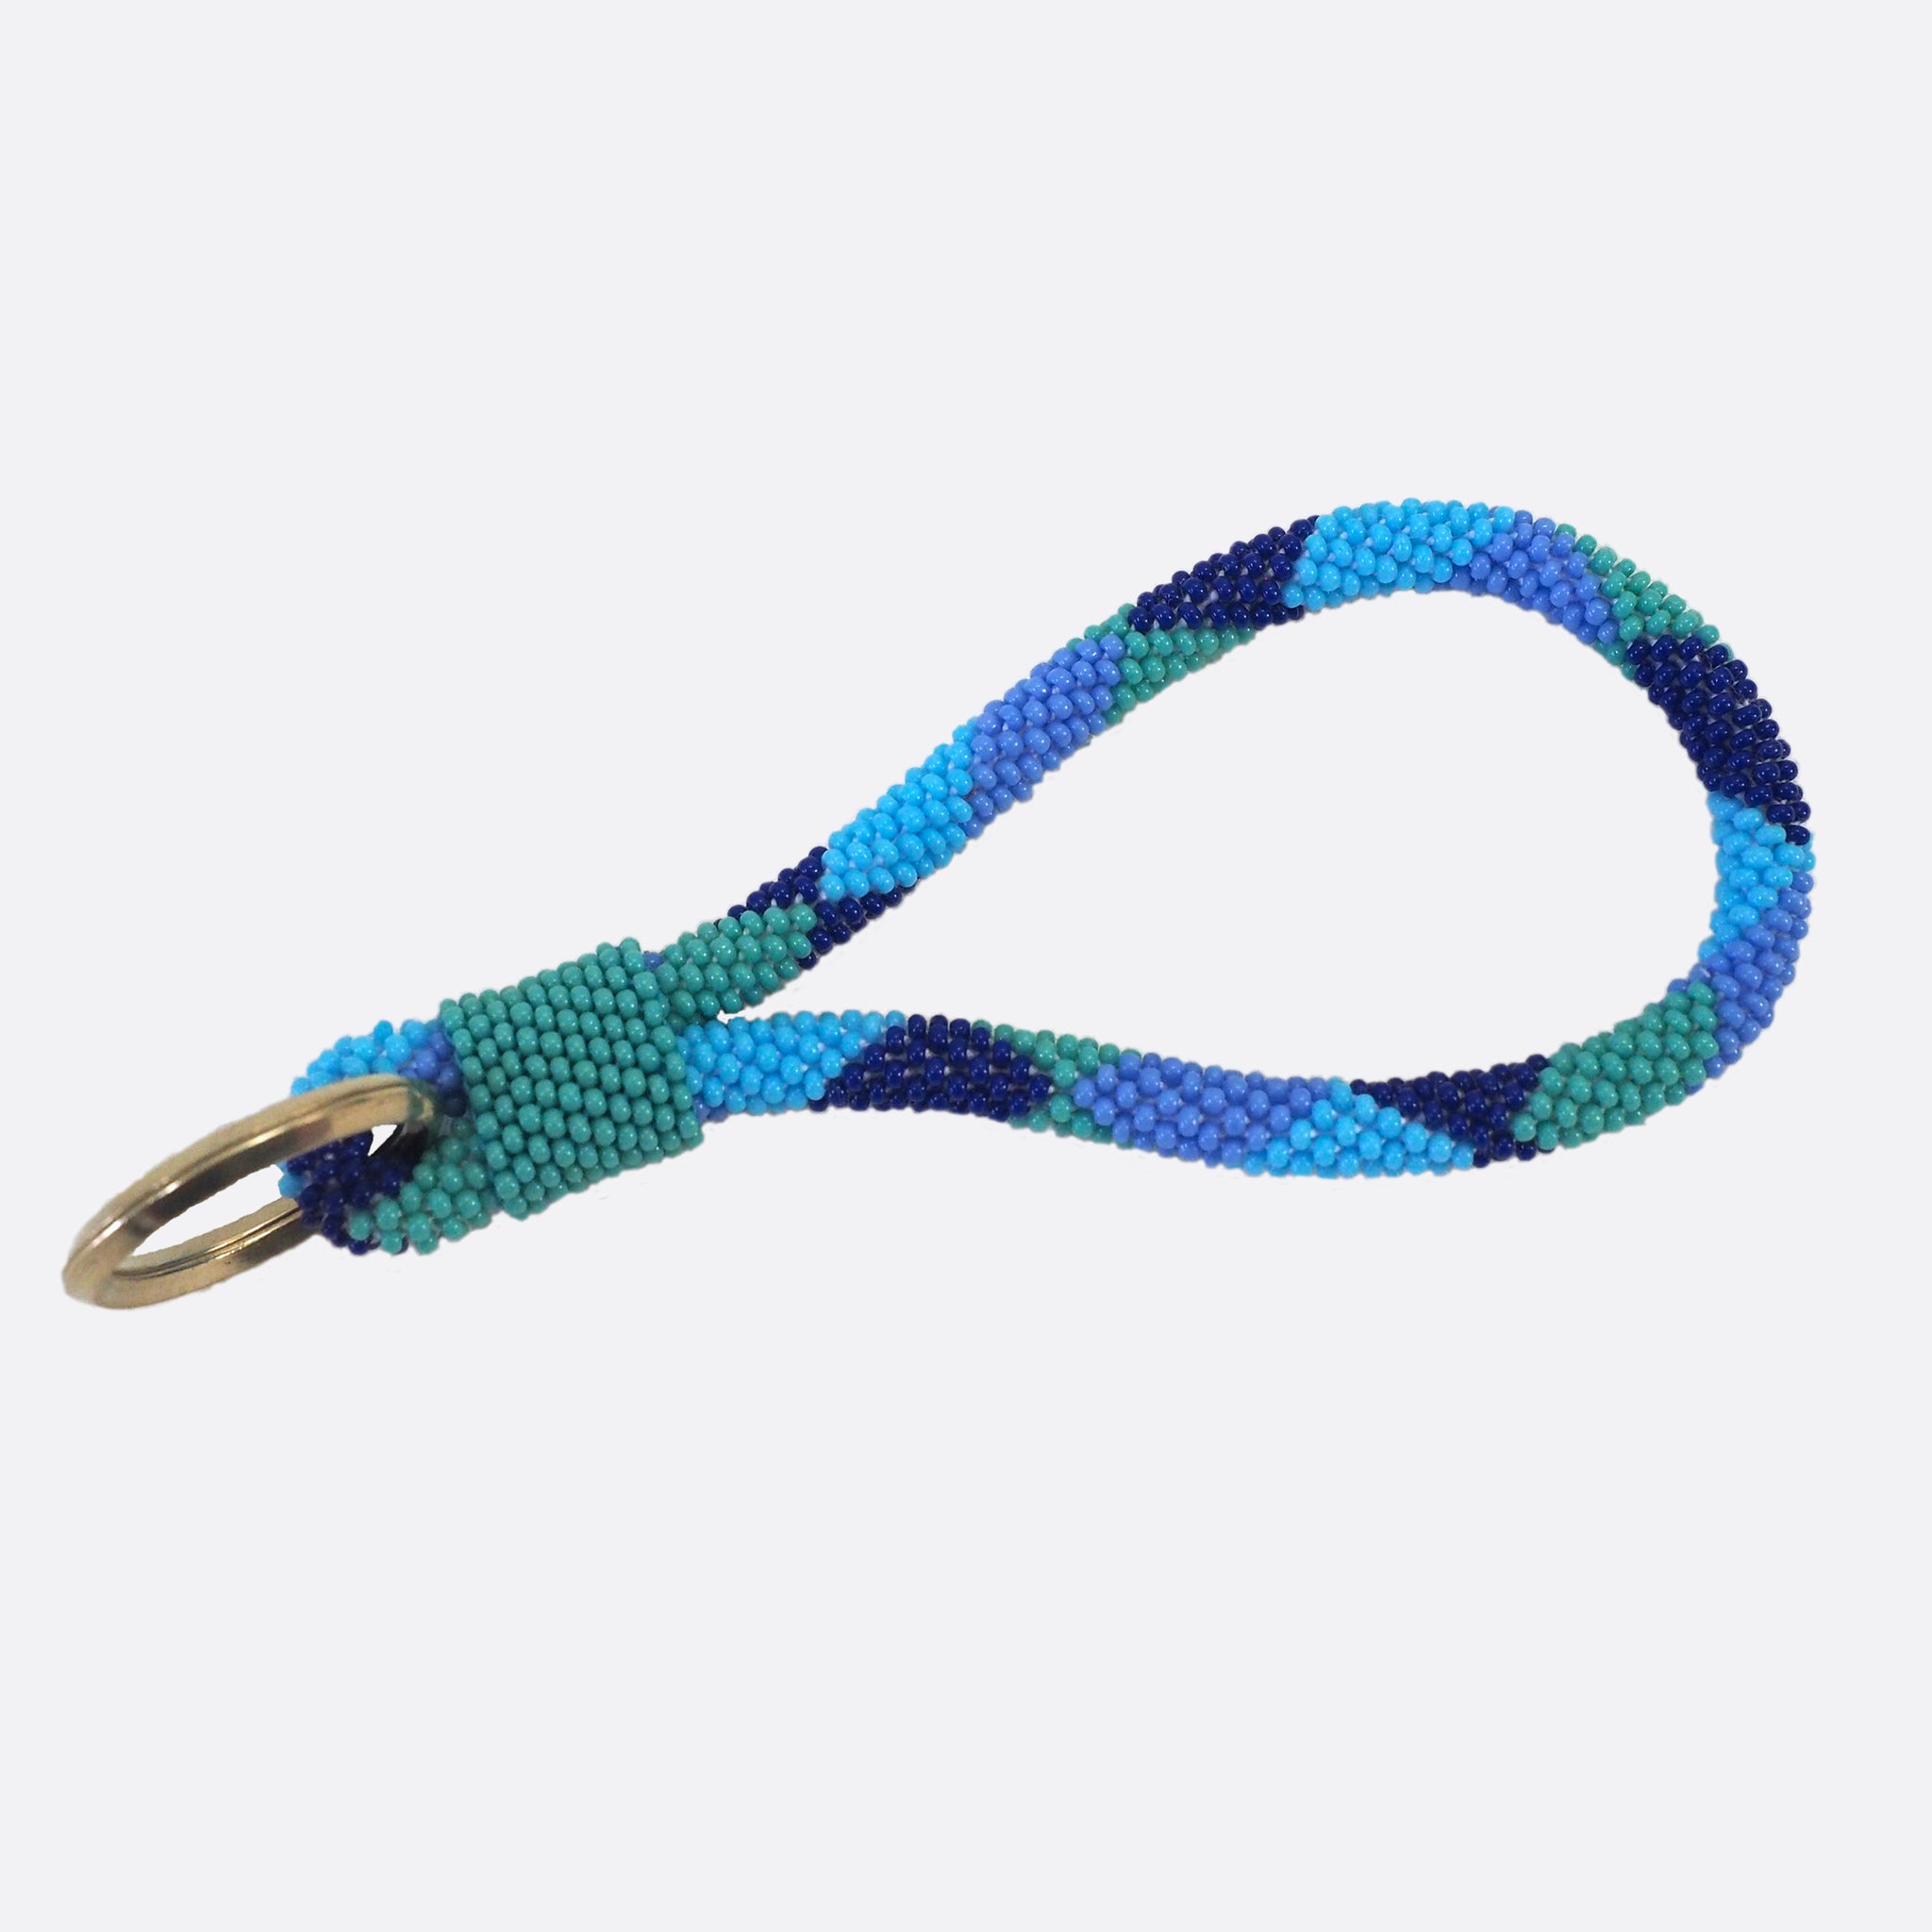 Beaded Key Chain - Blue Squares